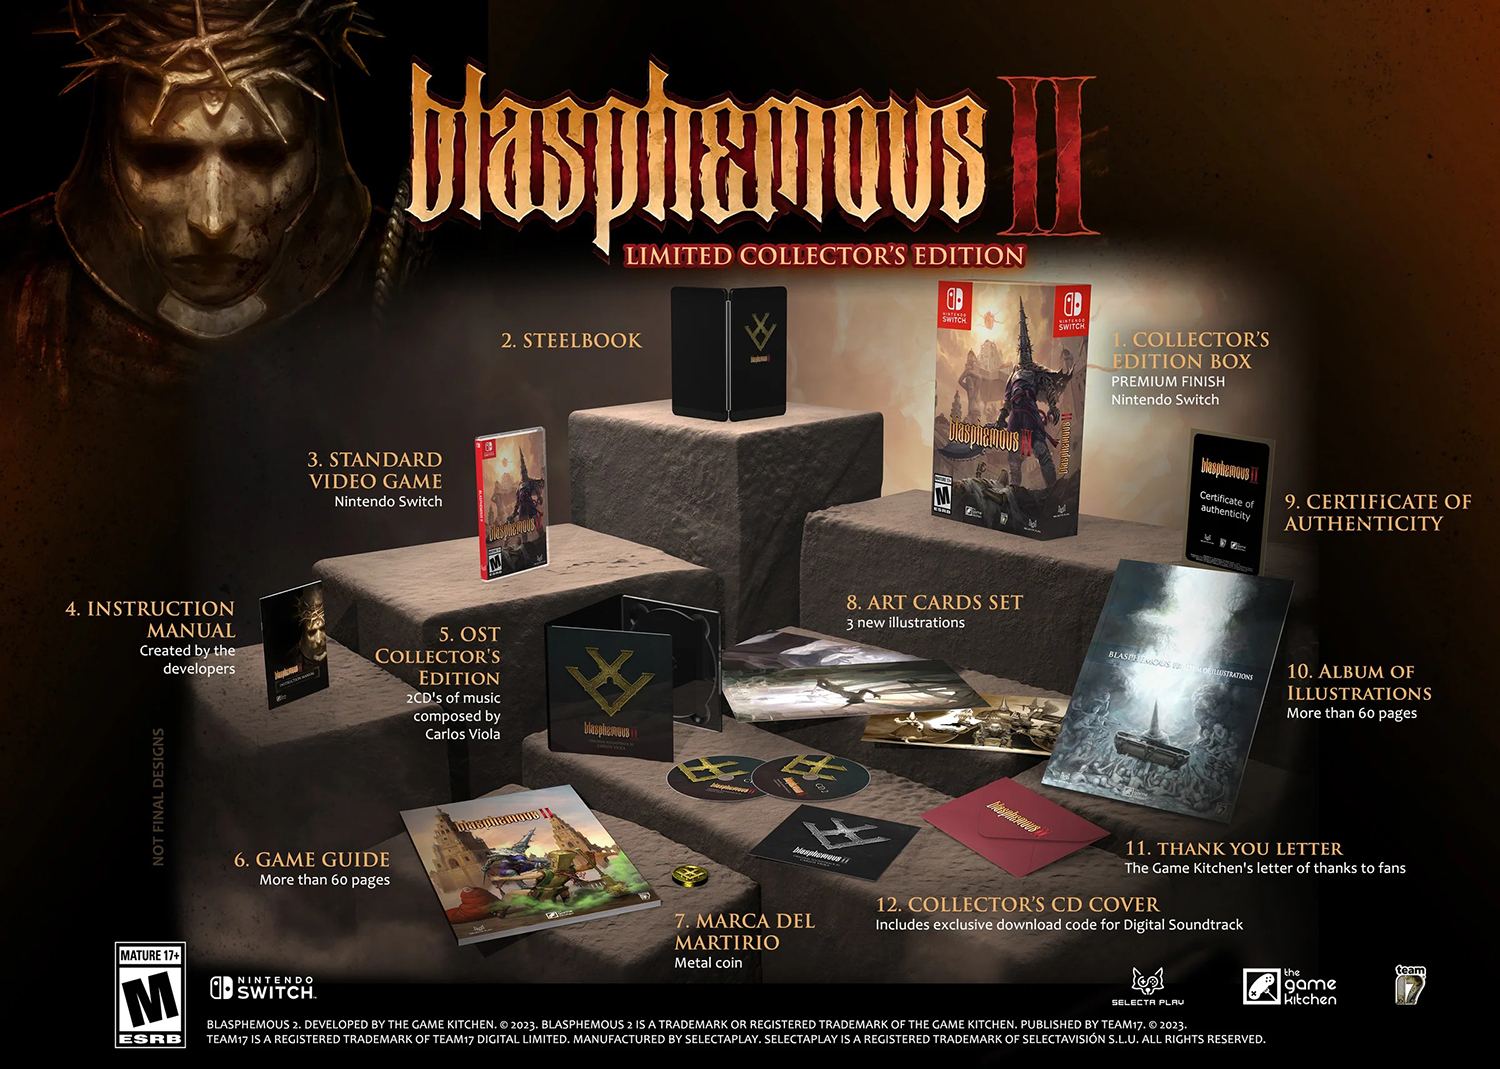 Blasphemous Deluxe Edition - PlayStation 4, PlayStation 4